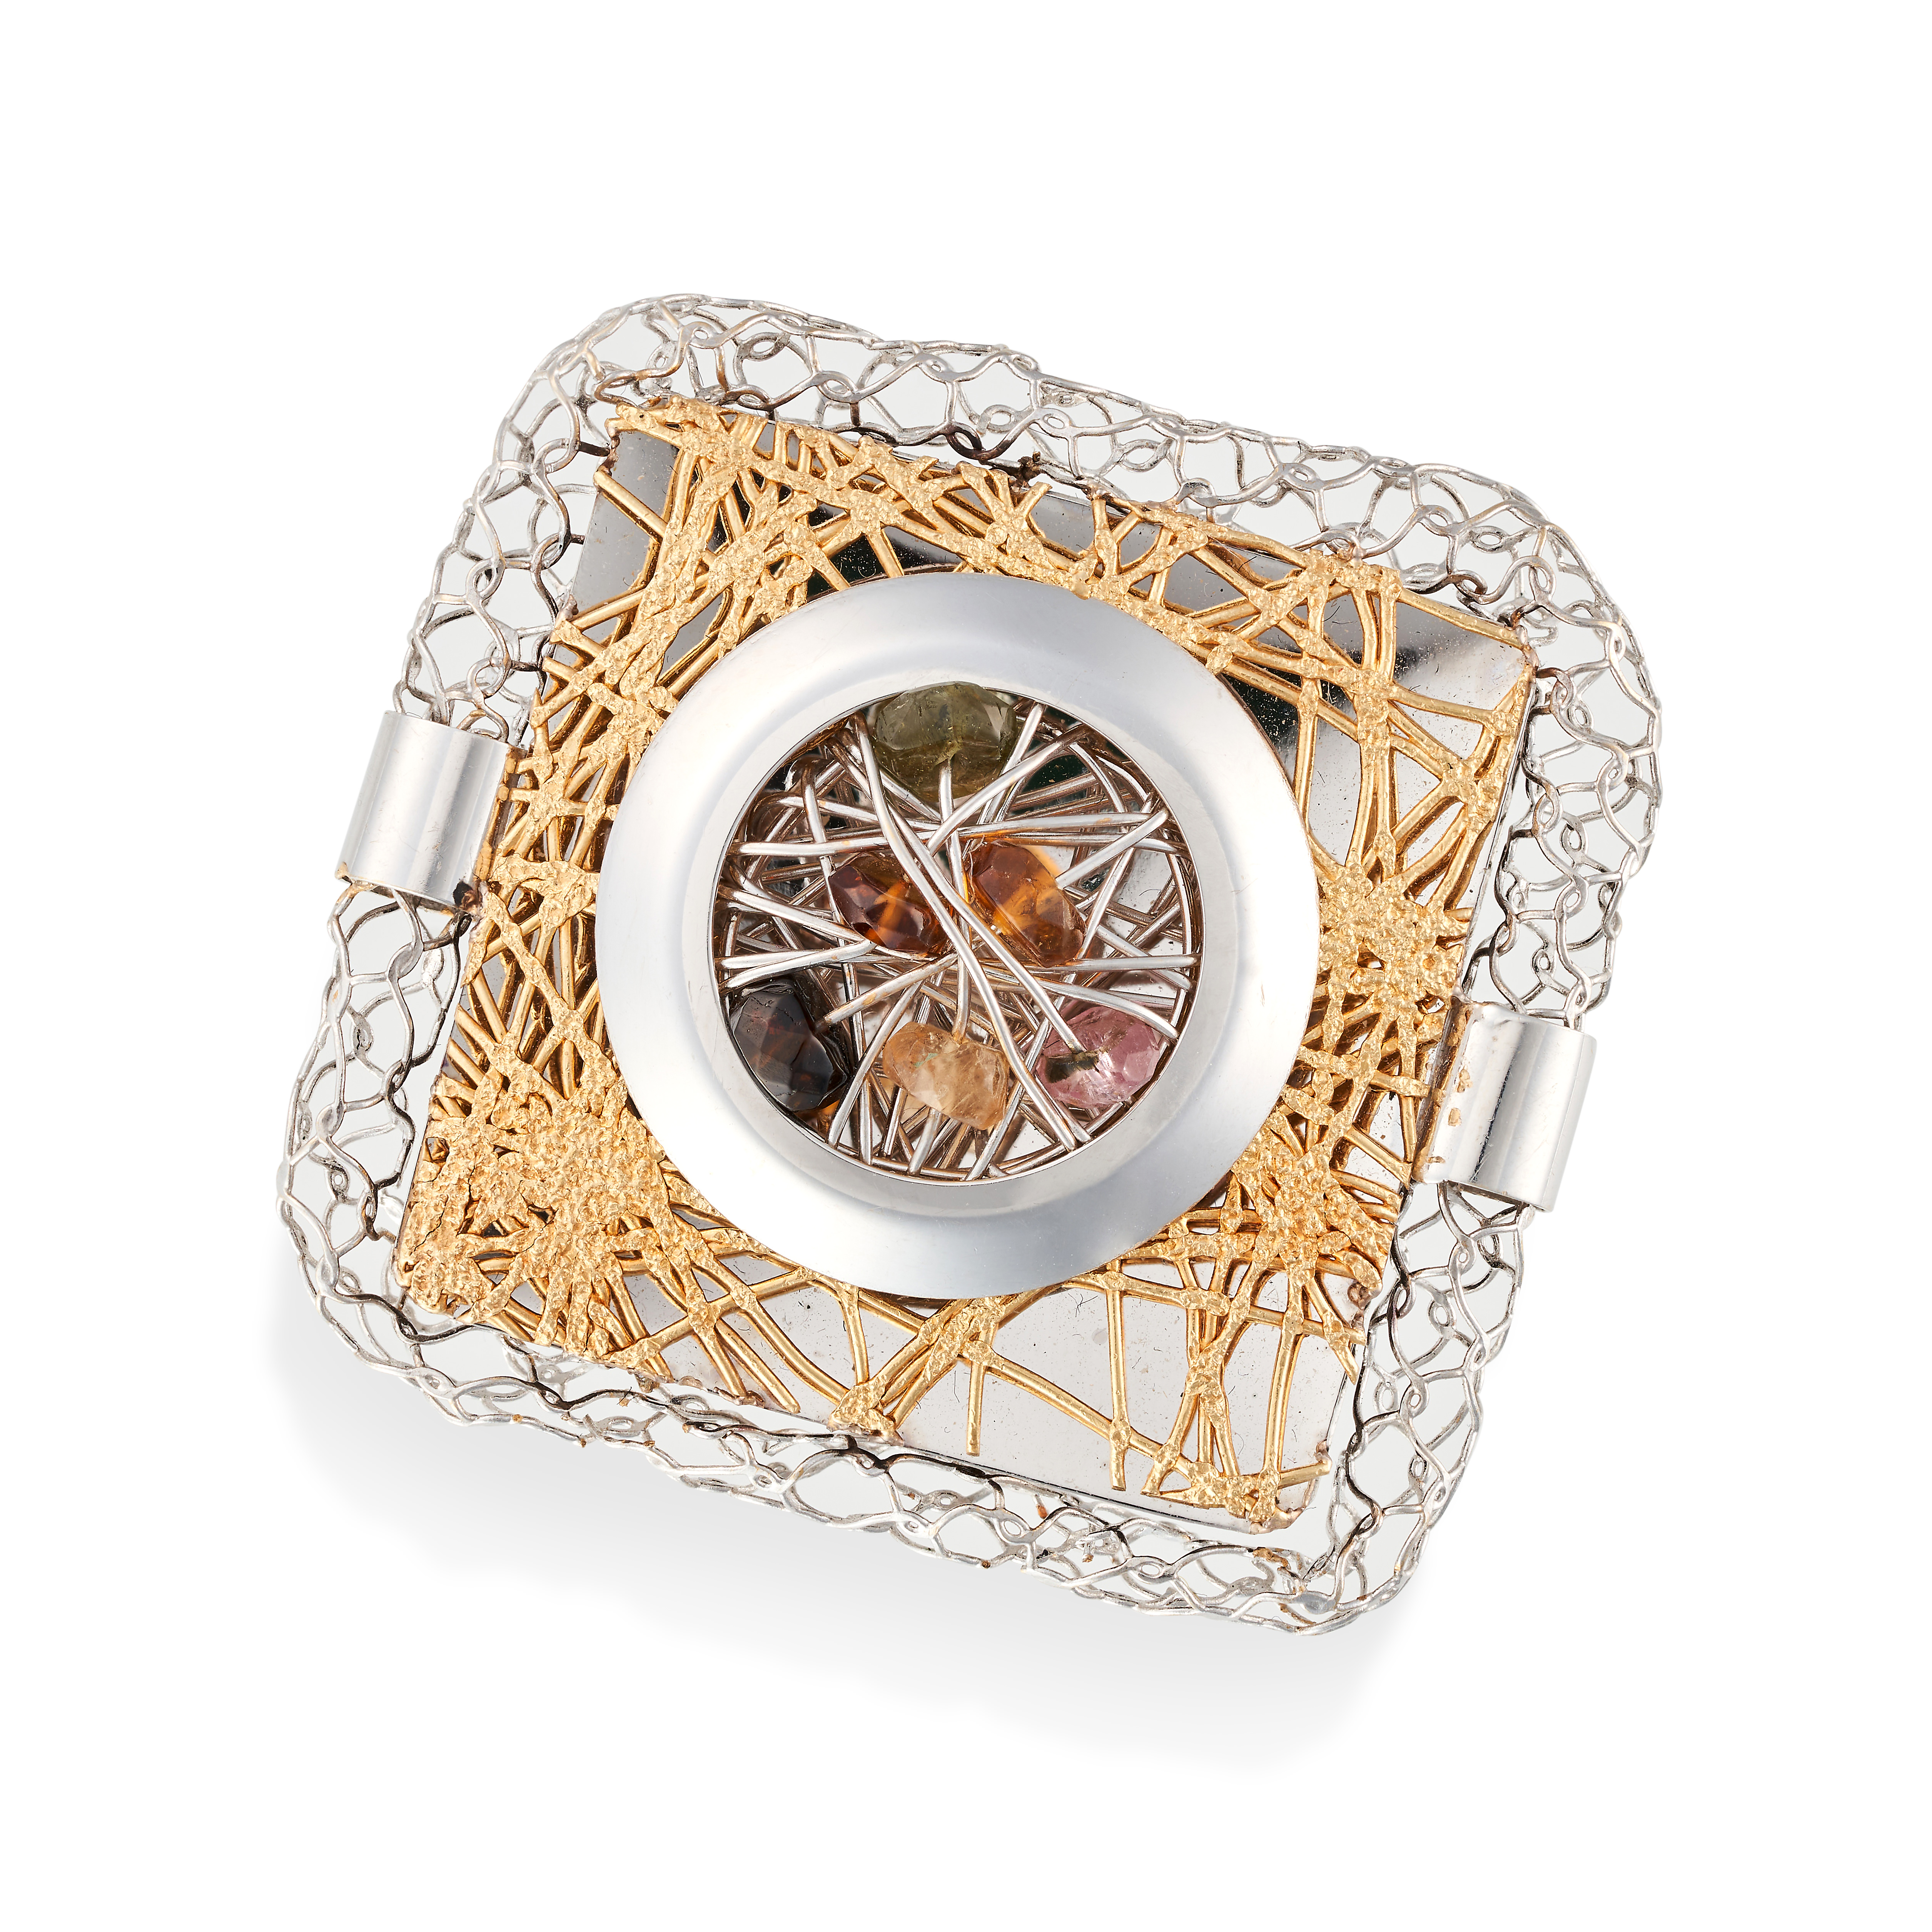 A GEMSET RING the stylised square ring set with a cluster of pink tourmaline, citrine and zircon ...